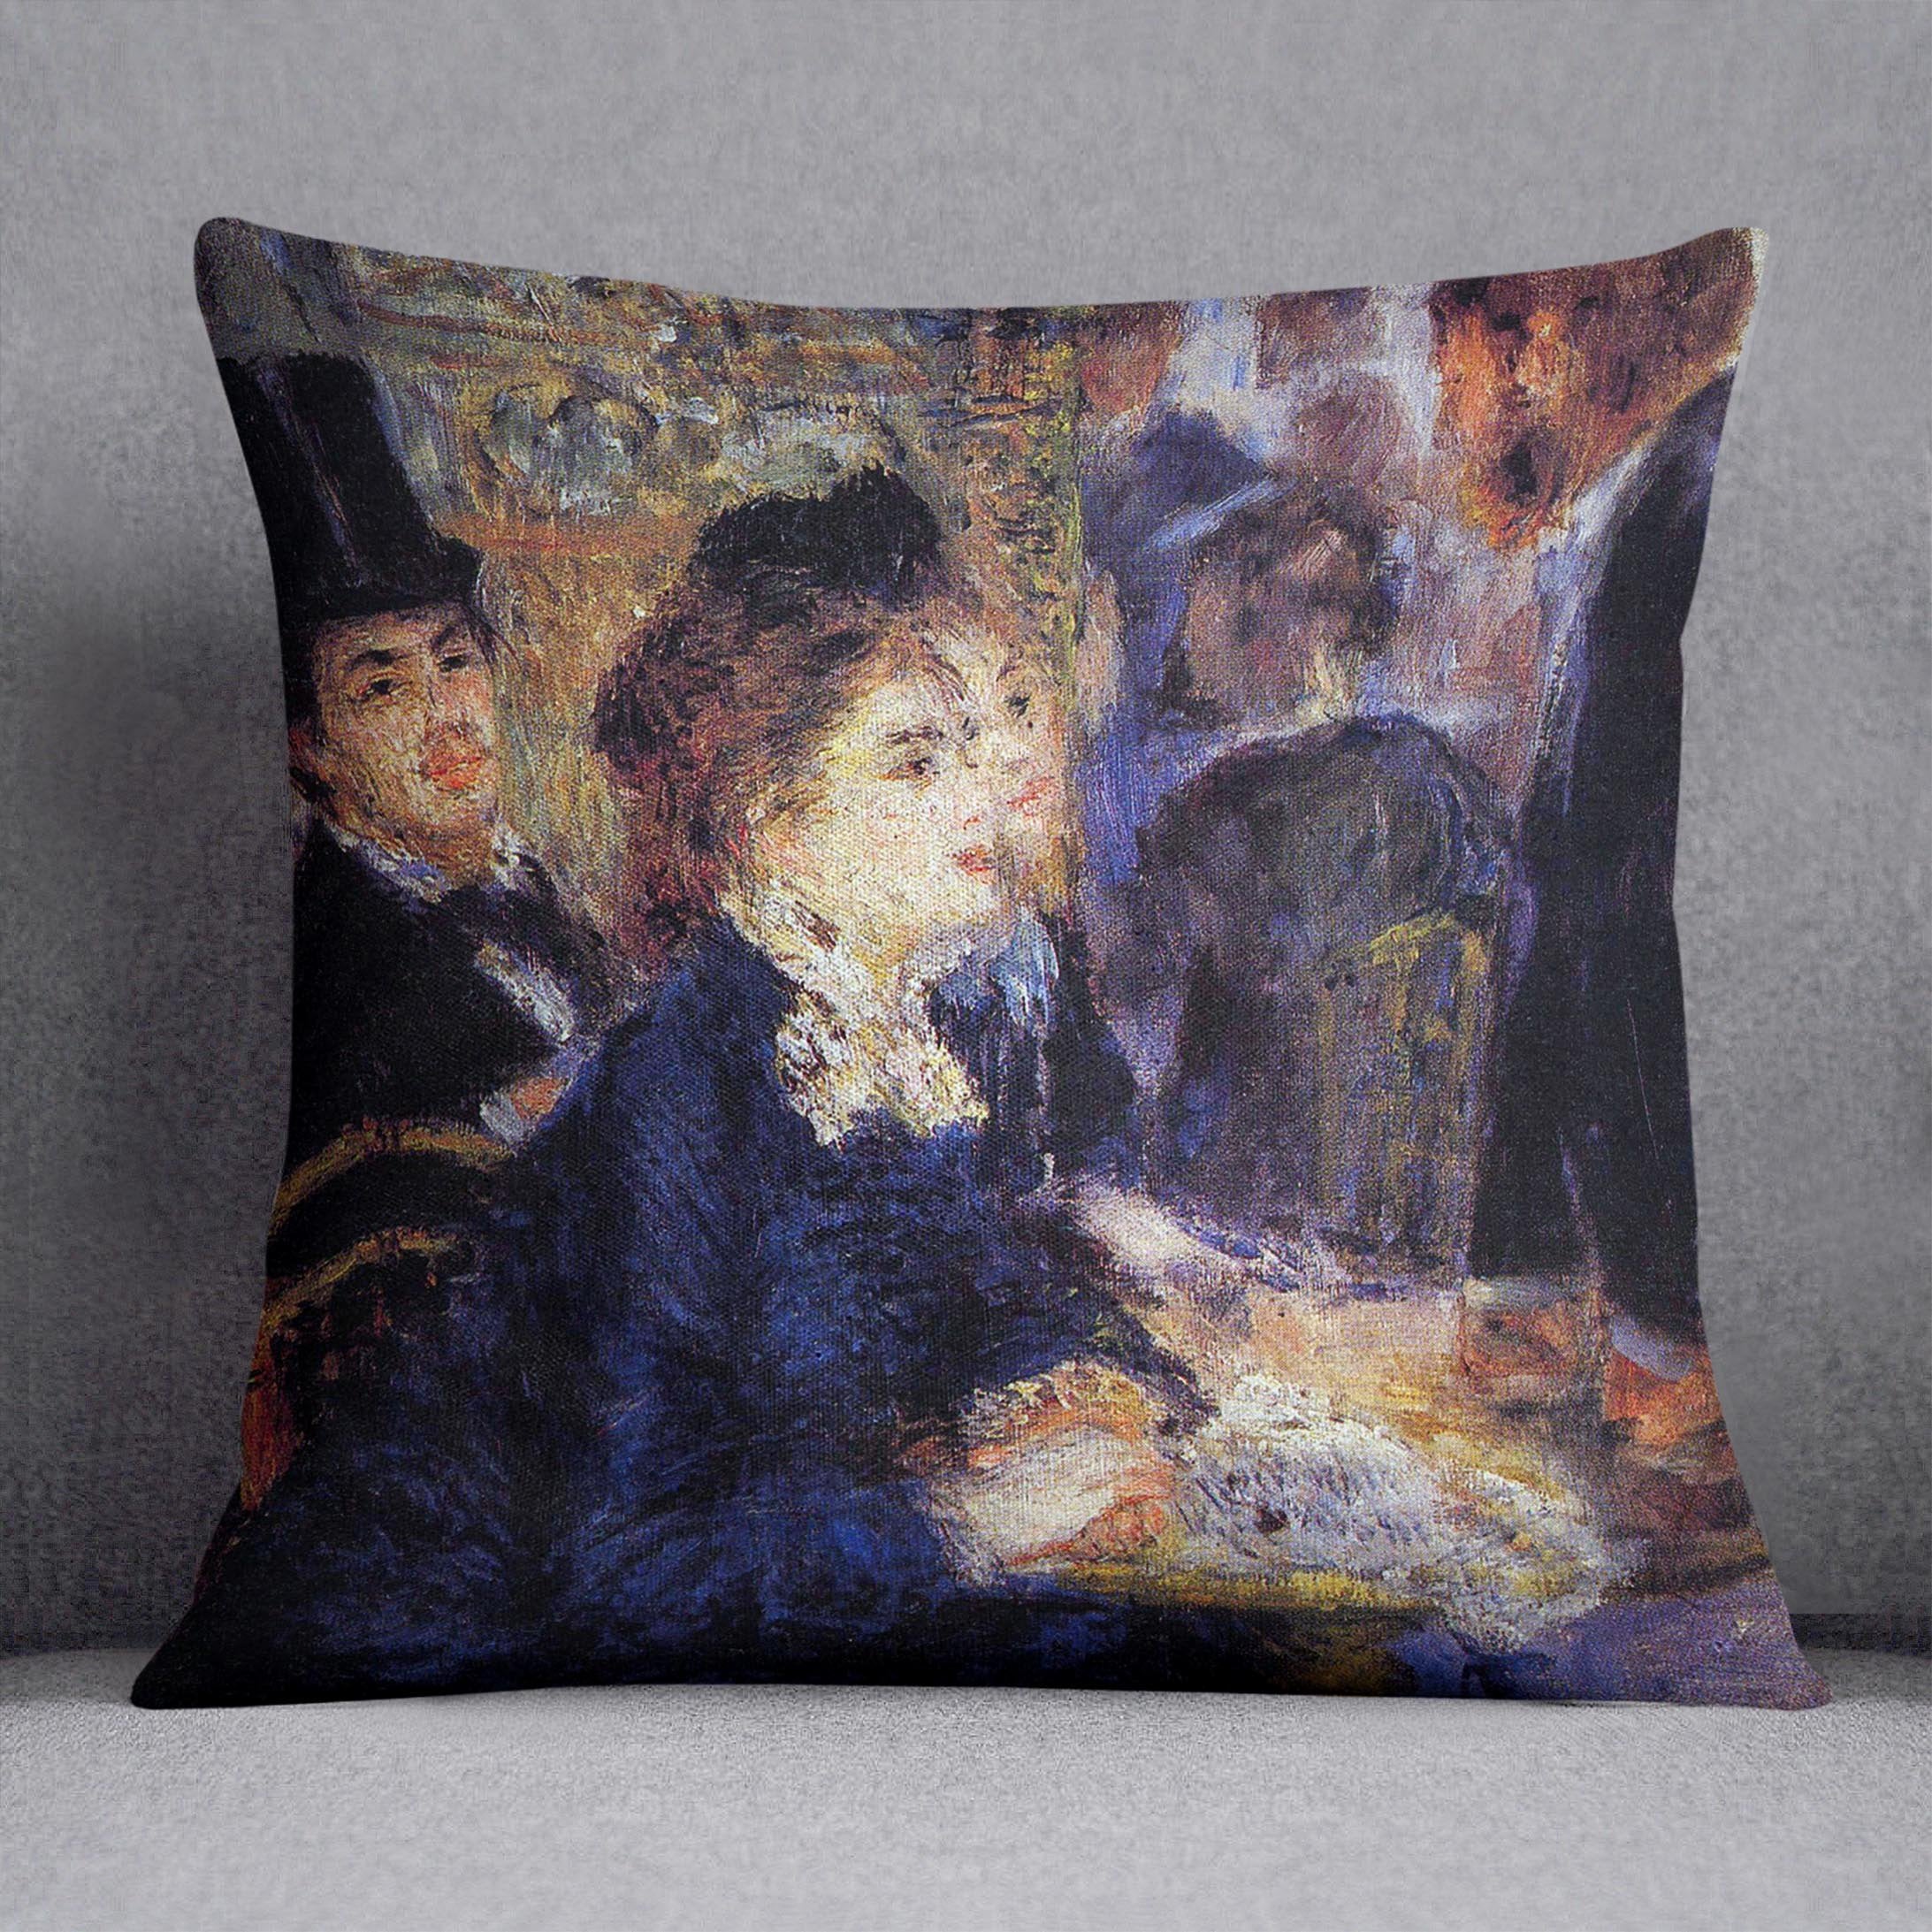 In the Cafe by Renoir Throw Pillow